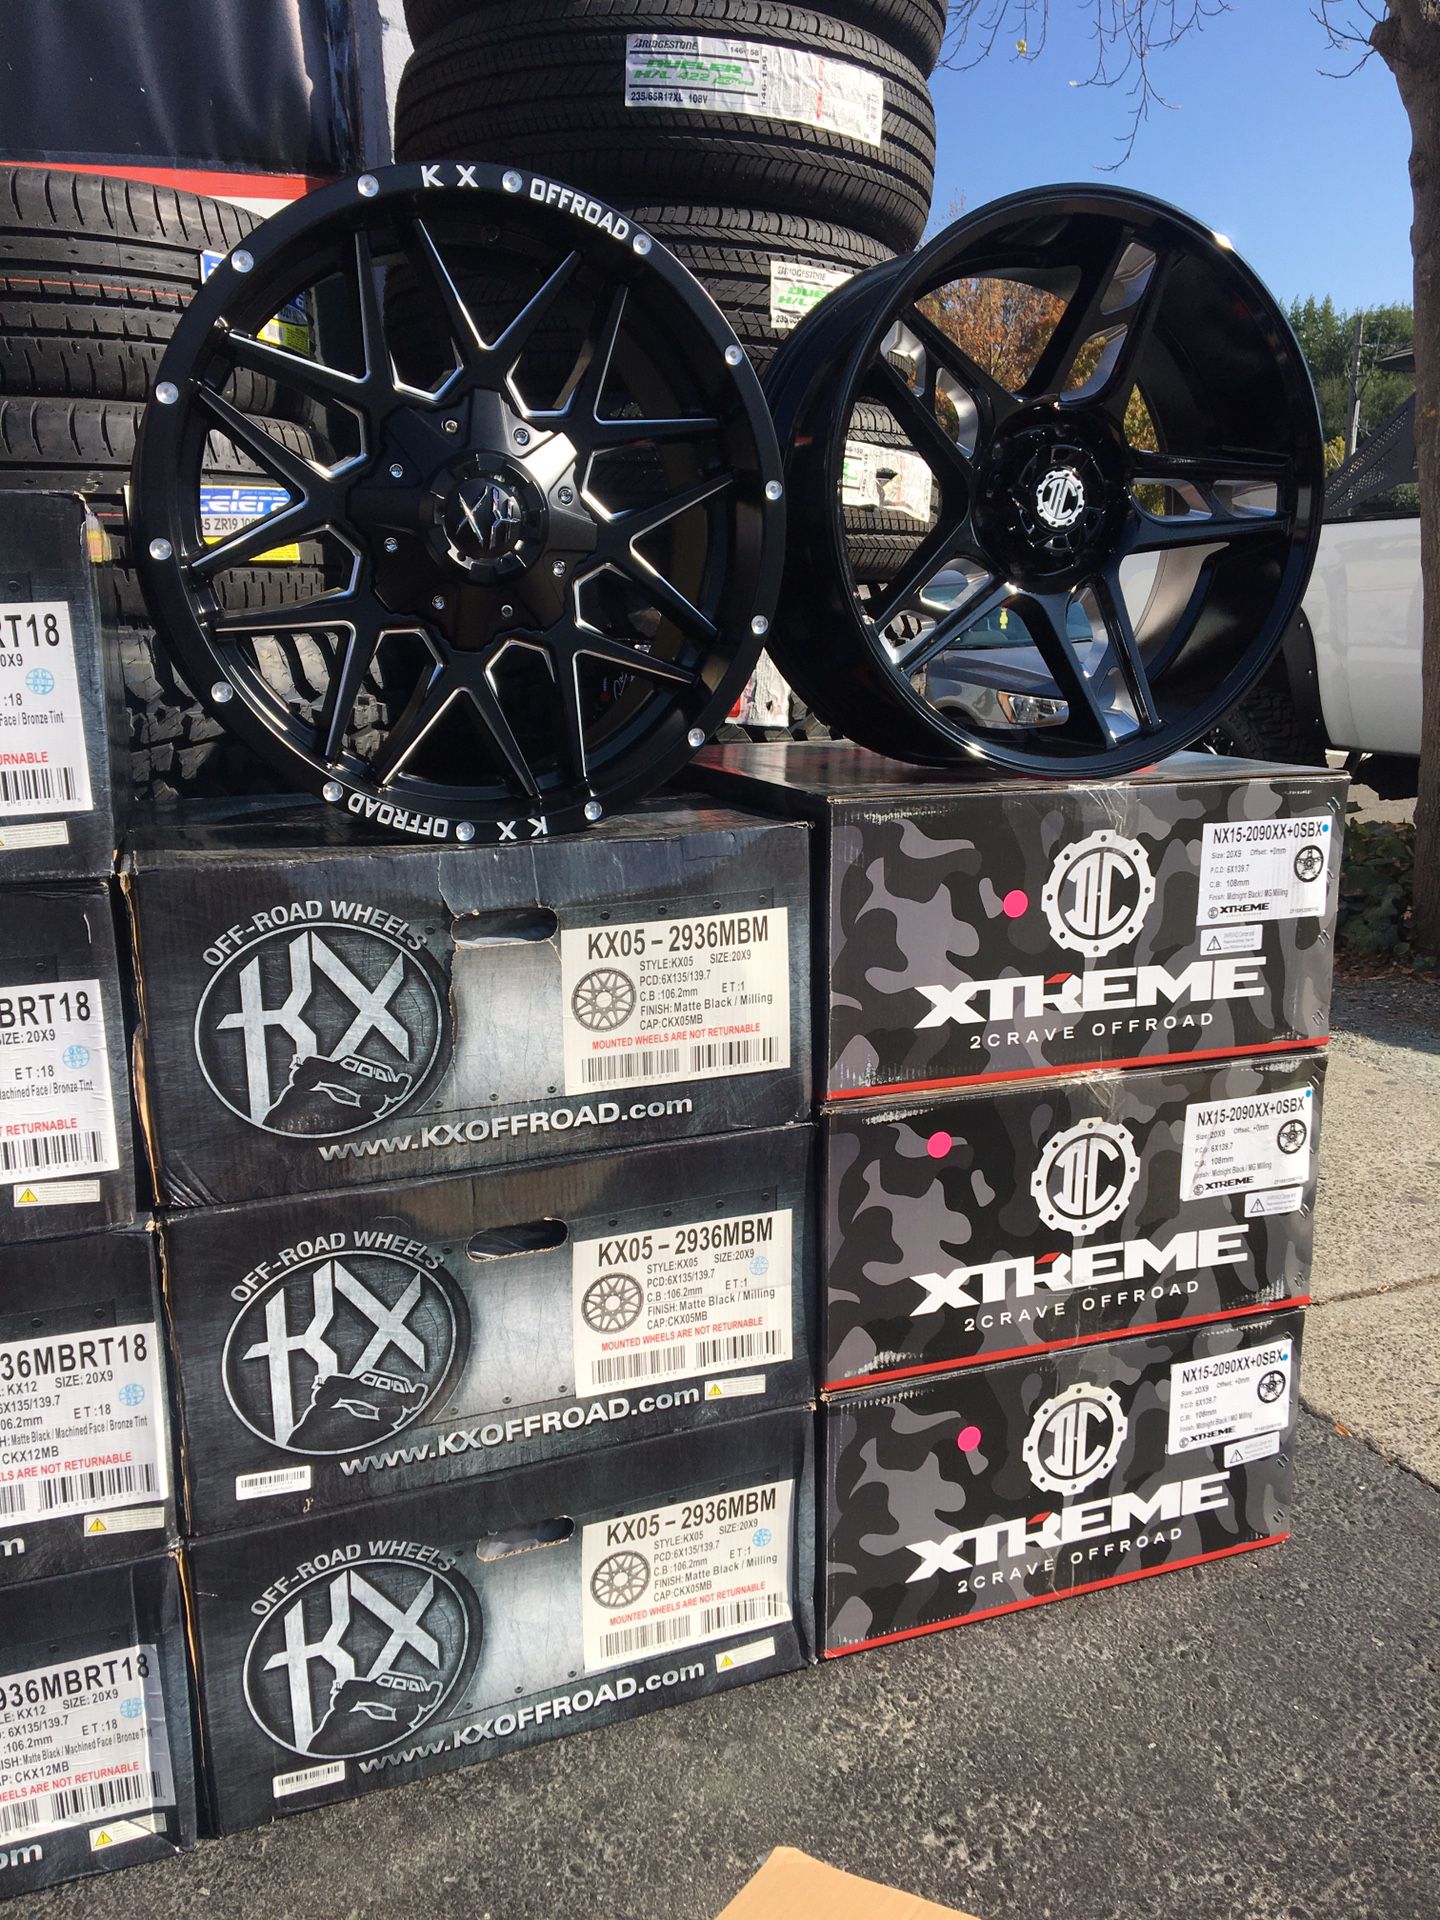 OFF ROAD WHEEL AND TIRE PACKAGE DEALS!! Only $39.00’out the door with financing pay the rest later!